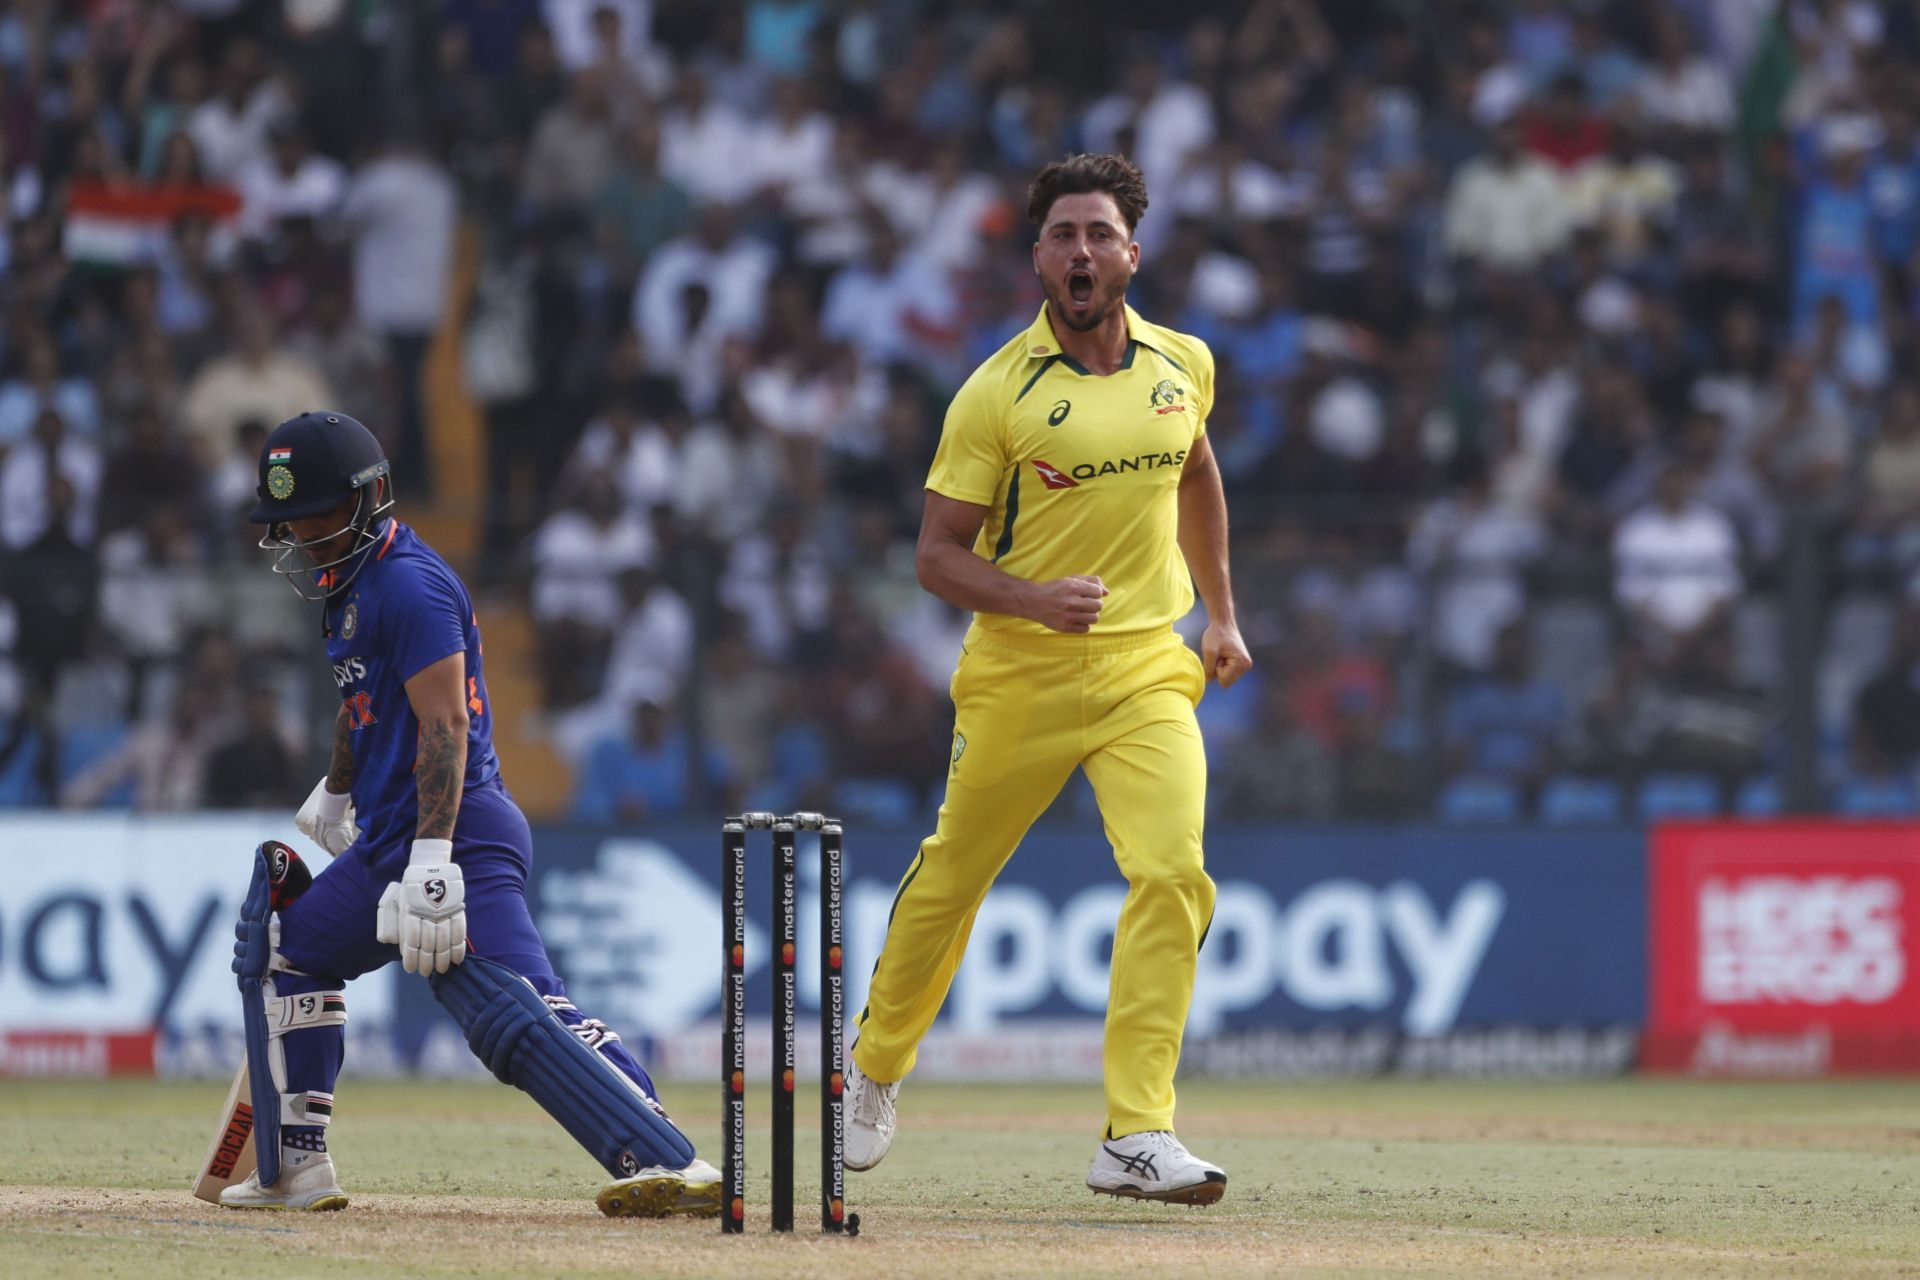 Marcus Stoinis celebrates the dismissal of Ishan Kishan in Mumbai. Pic: Getty Images